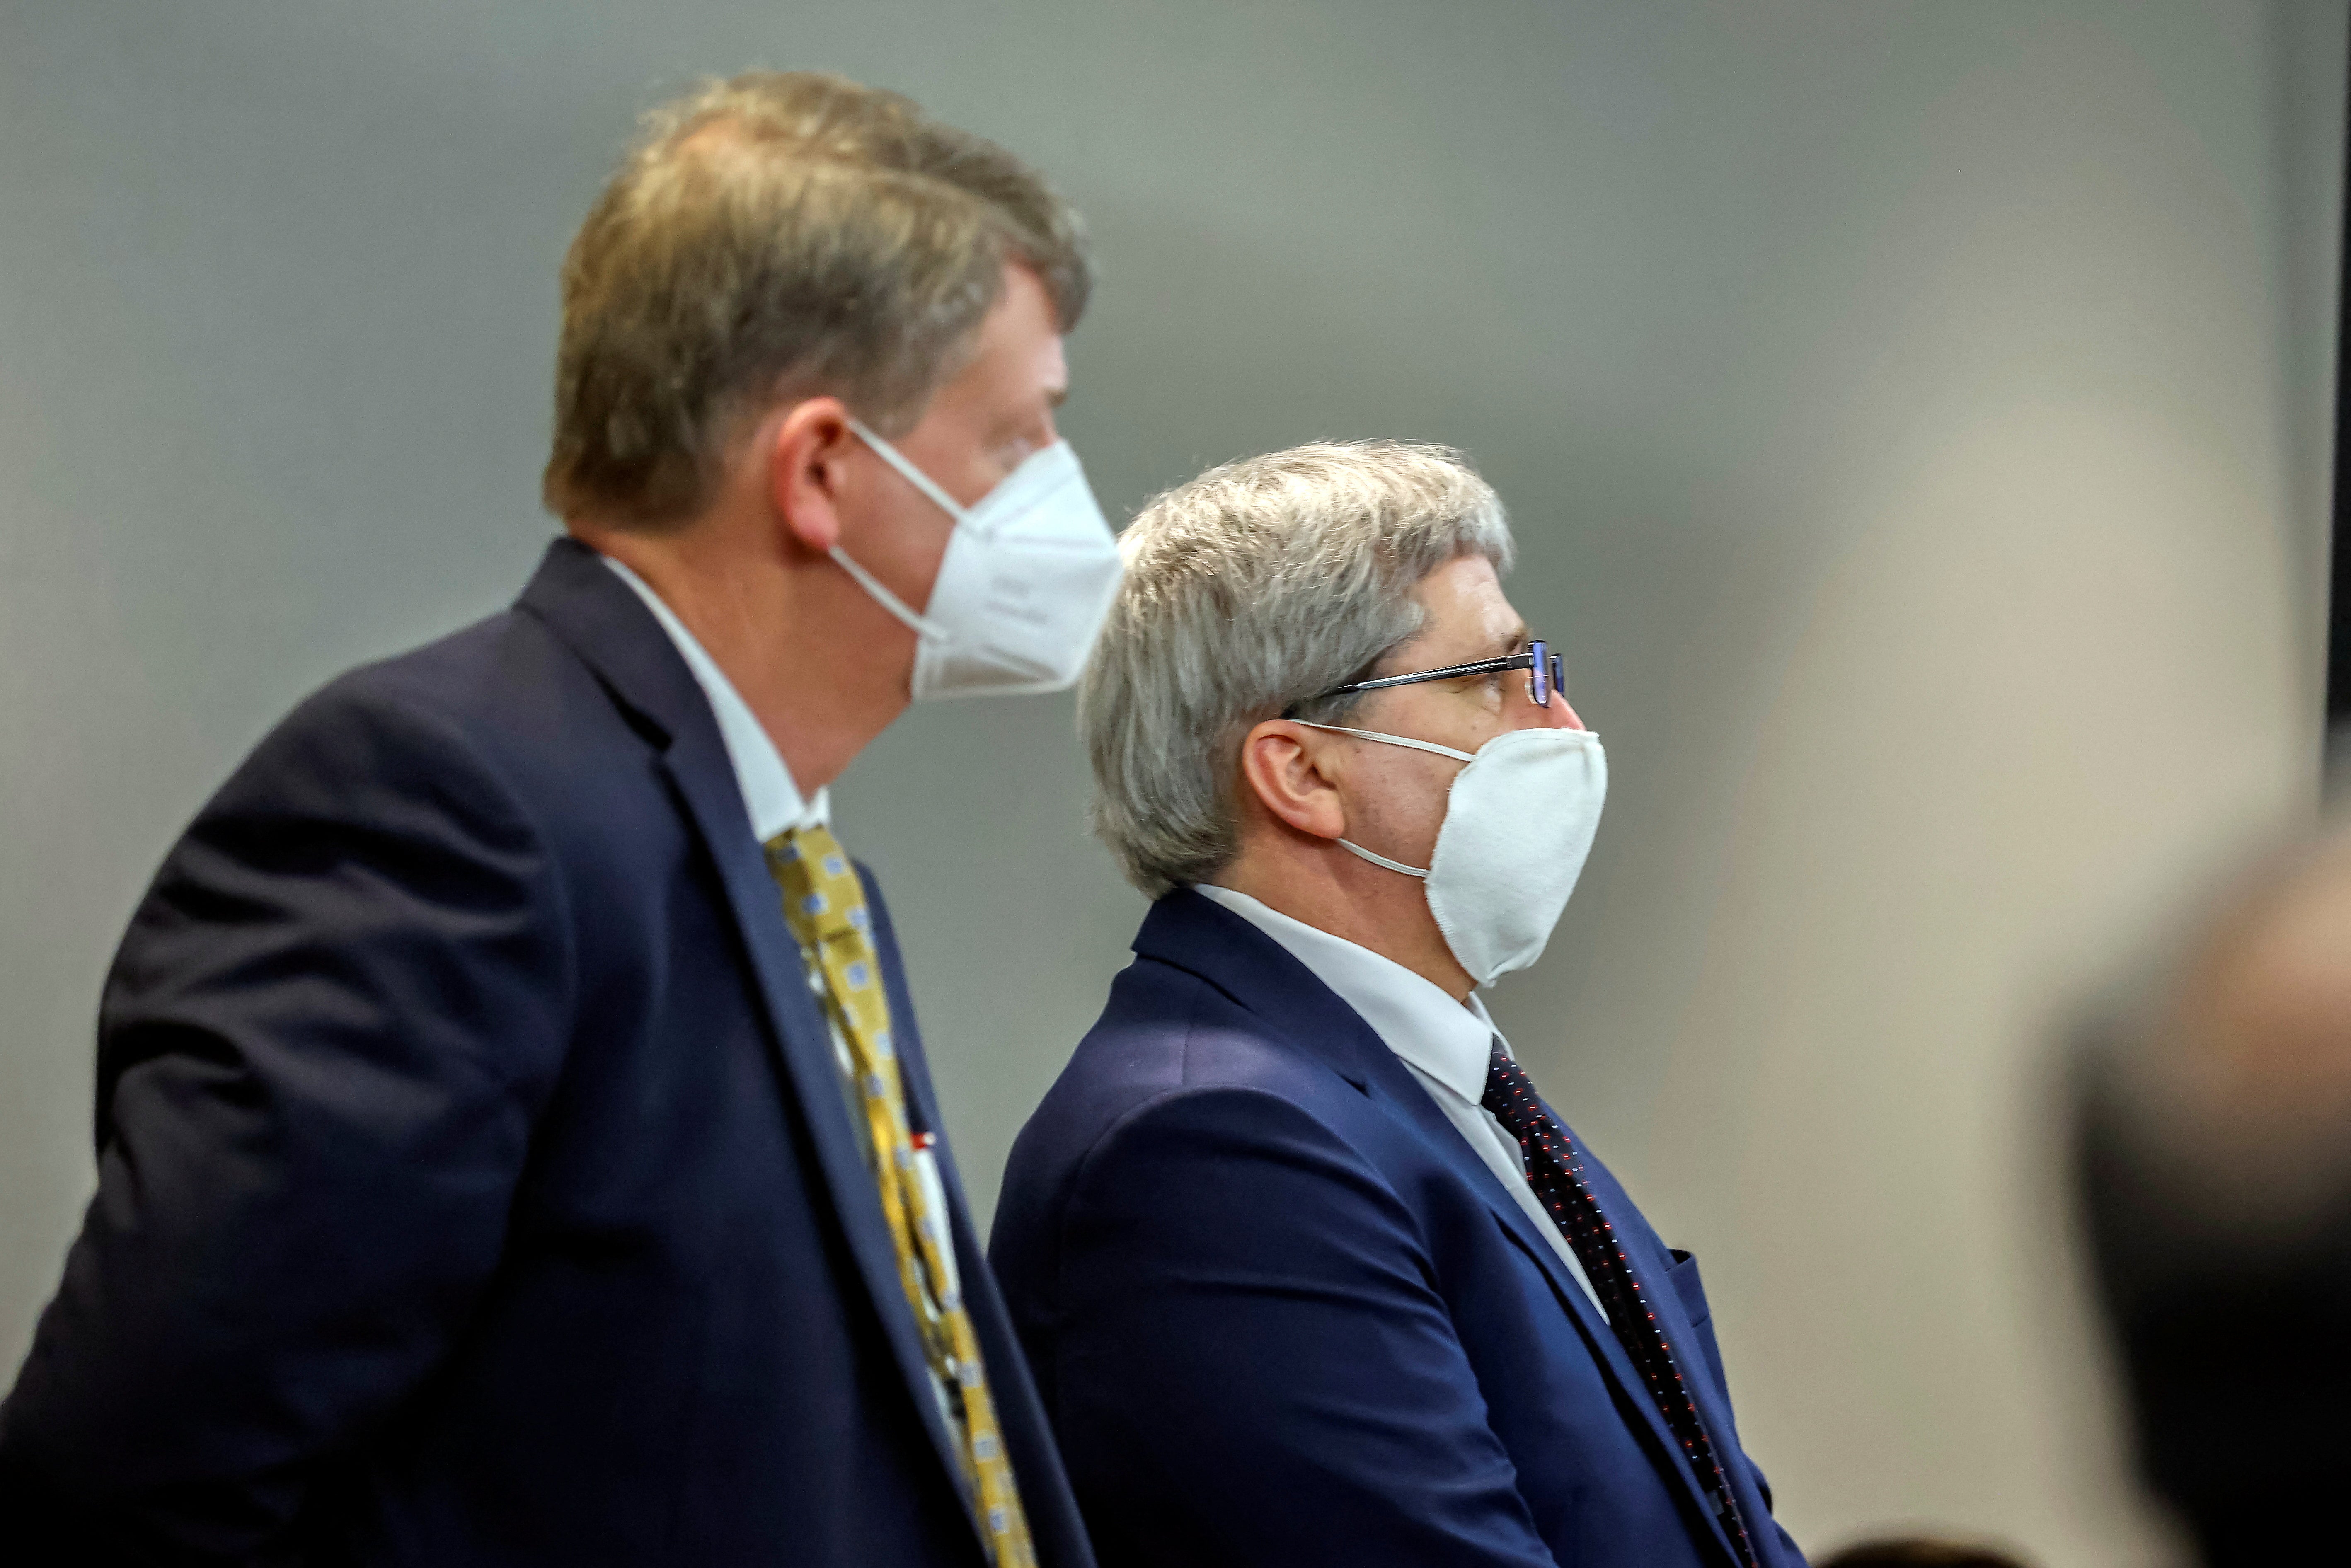 William "Roddie" Bryan, centre, stands with his attorney Kevin Gough, left, while superior court Judge Timothy Walmsley reads his sentence